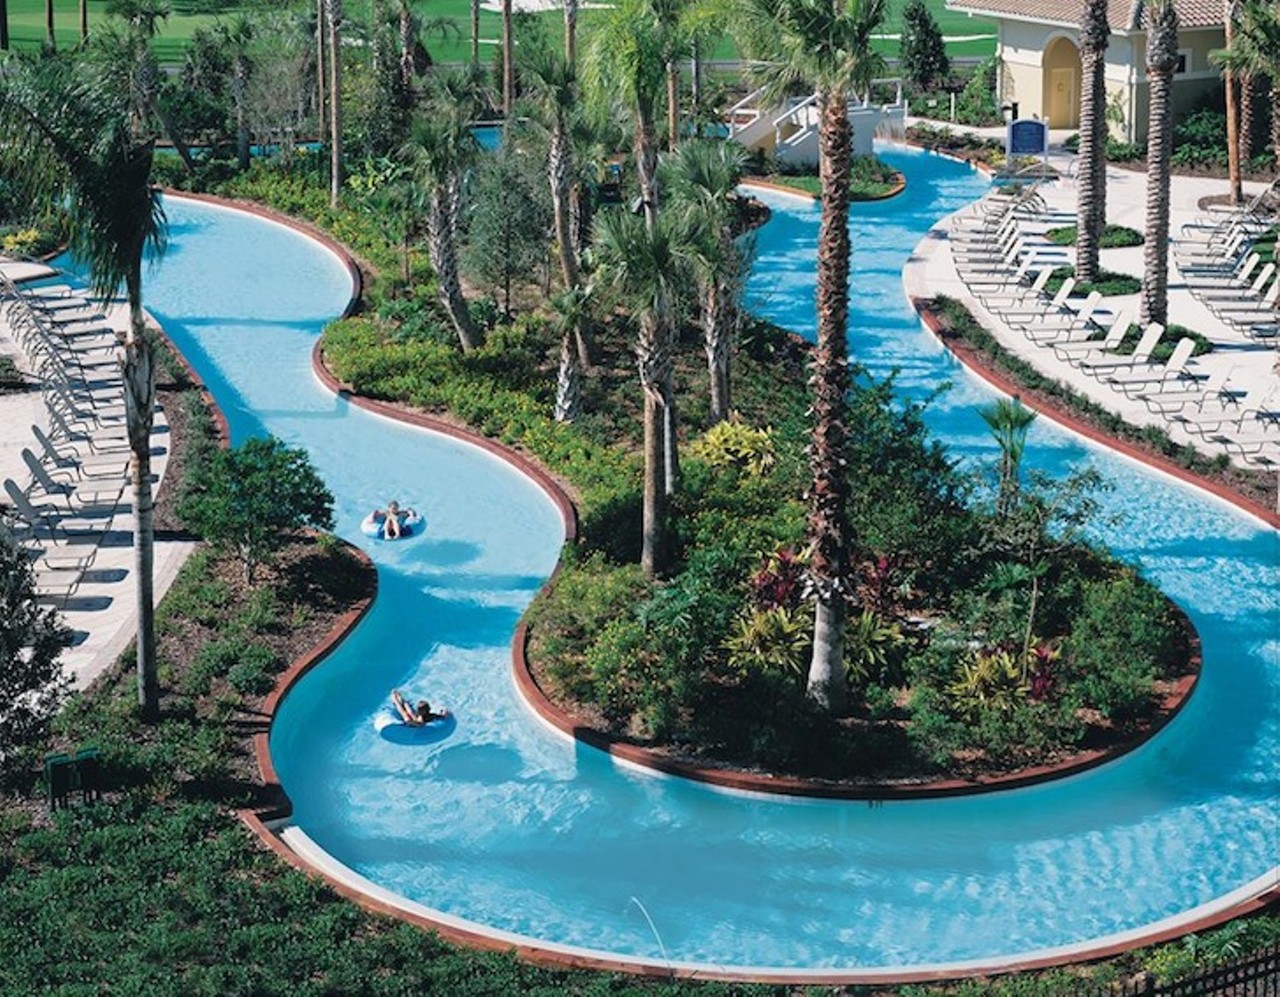 Omni Orlando Resort
1500 Masters Blvd., ChampionsGate, 407-390-6664
If the stagnant waters of a typical pool just aren&#146;t your cup of tea, hop into an inner tube and take a ride down Omni&#146;s 850-foot lazy river instead. The channel runs through tunnels, hidden canyons and waterfalls, so there&#146;s plenty to see as you laze the day away. And if the stream gets too crowded, escape to the formal pool, an elegant oasis with eight exclusive cabanas available to rent. The regular pool and lazy river are open from 8 a.m. from 10 p.m. The formal pool gives you a little more time for relaxation, and to enjoy the sunrise and sunset, as it opens at 6 a.m. and closes at 10 p.m. Friends and family can join registered guests at the pools. 
Photo via Omni Orlando Resort At Champions Gate/Facebook